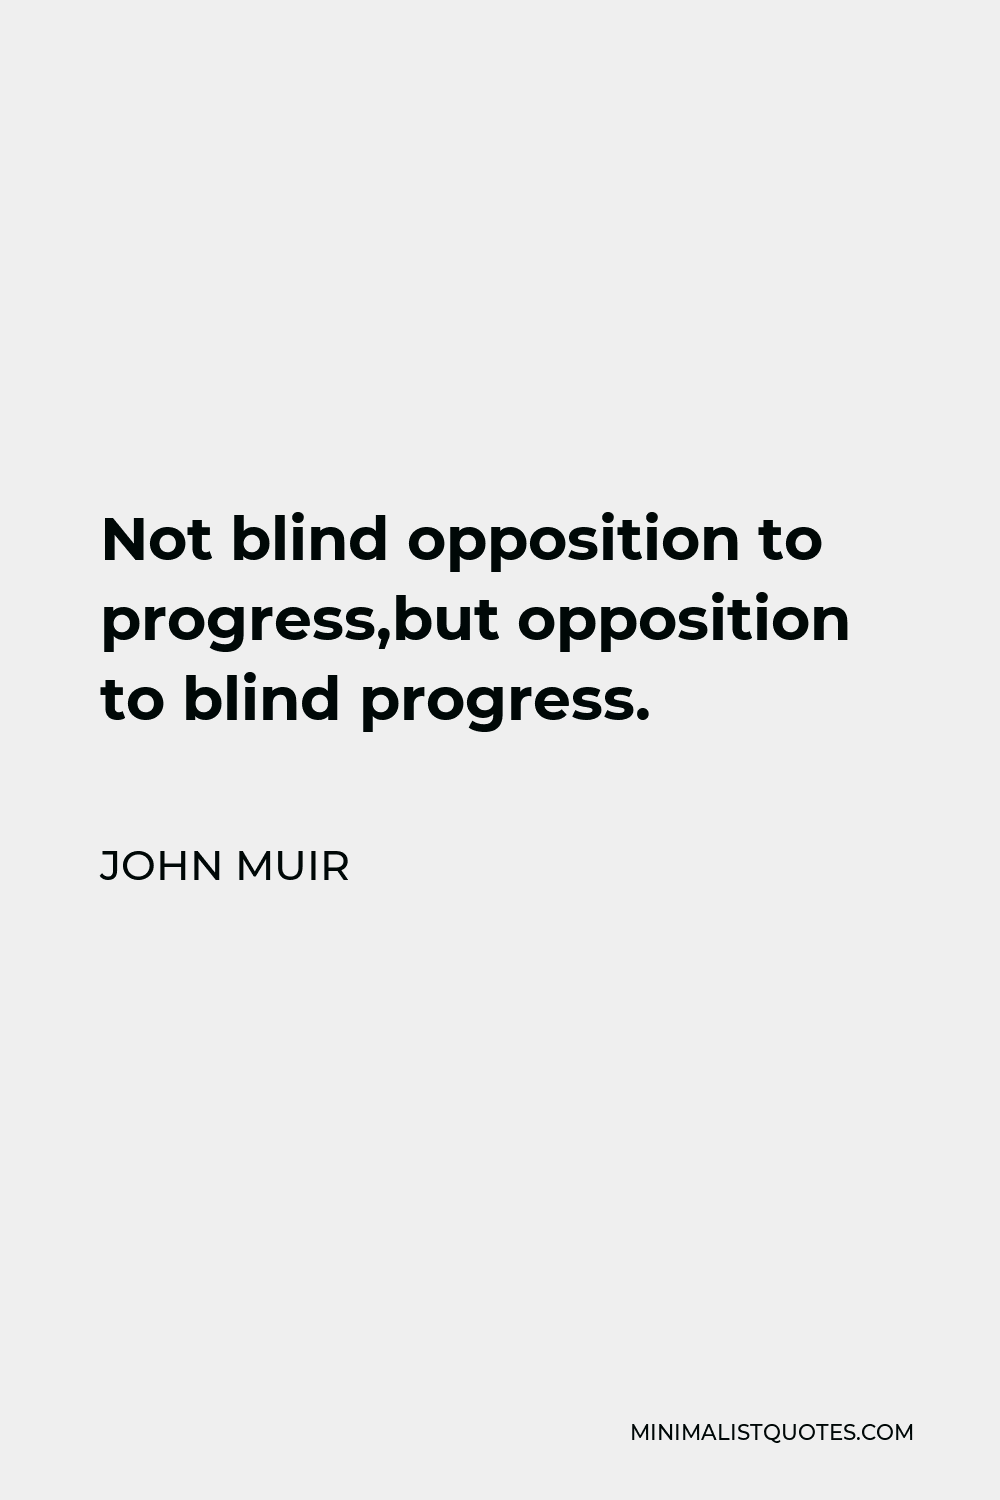 John Muir Quote - Not blind opposition to progress,but opposition to blind progress.